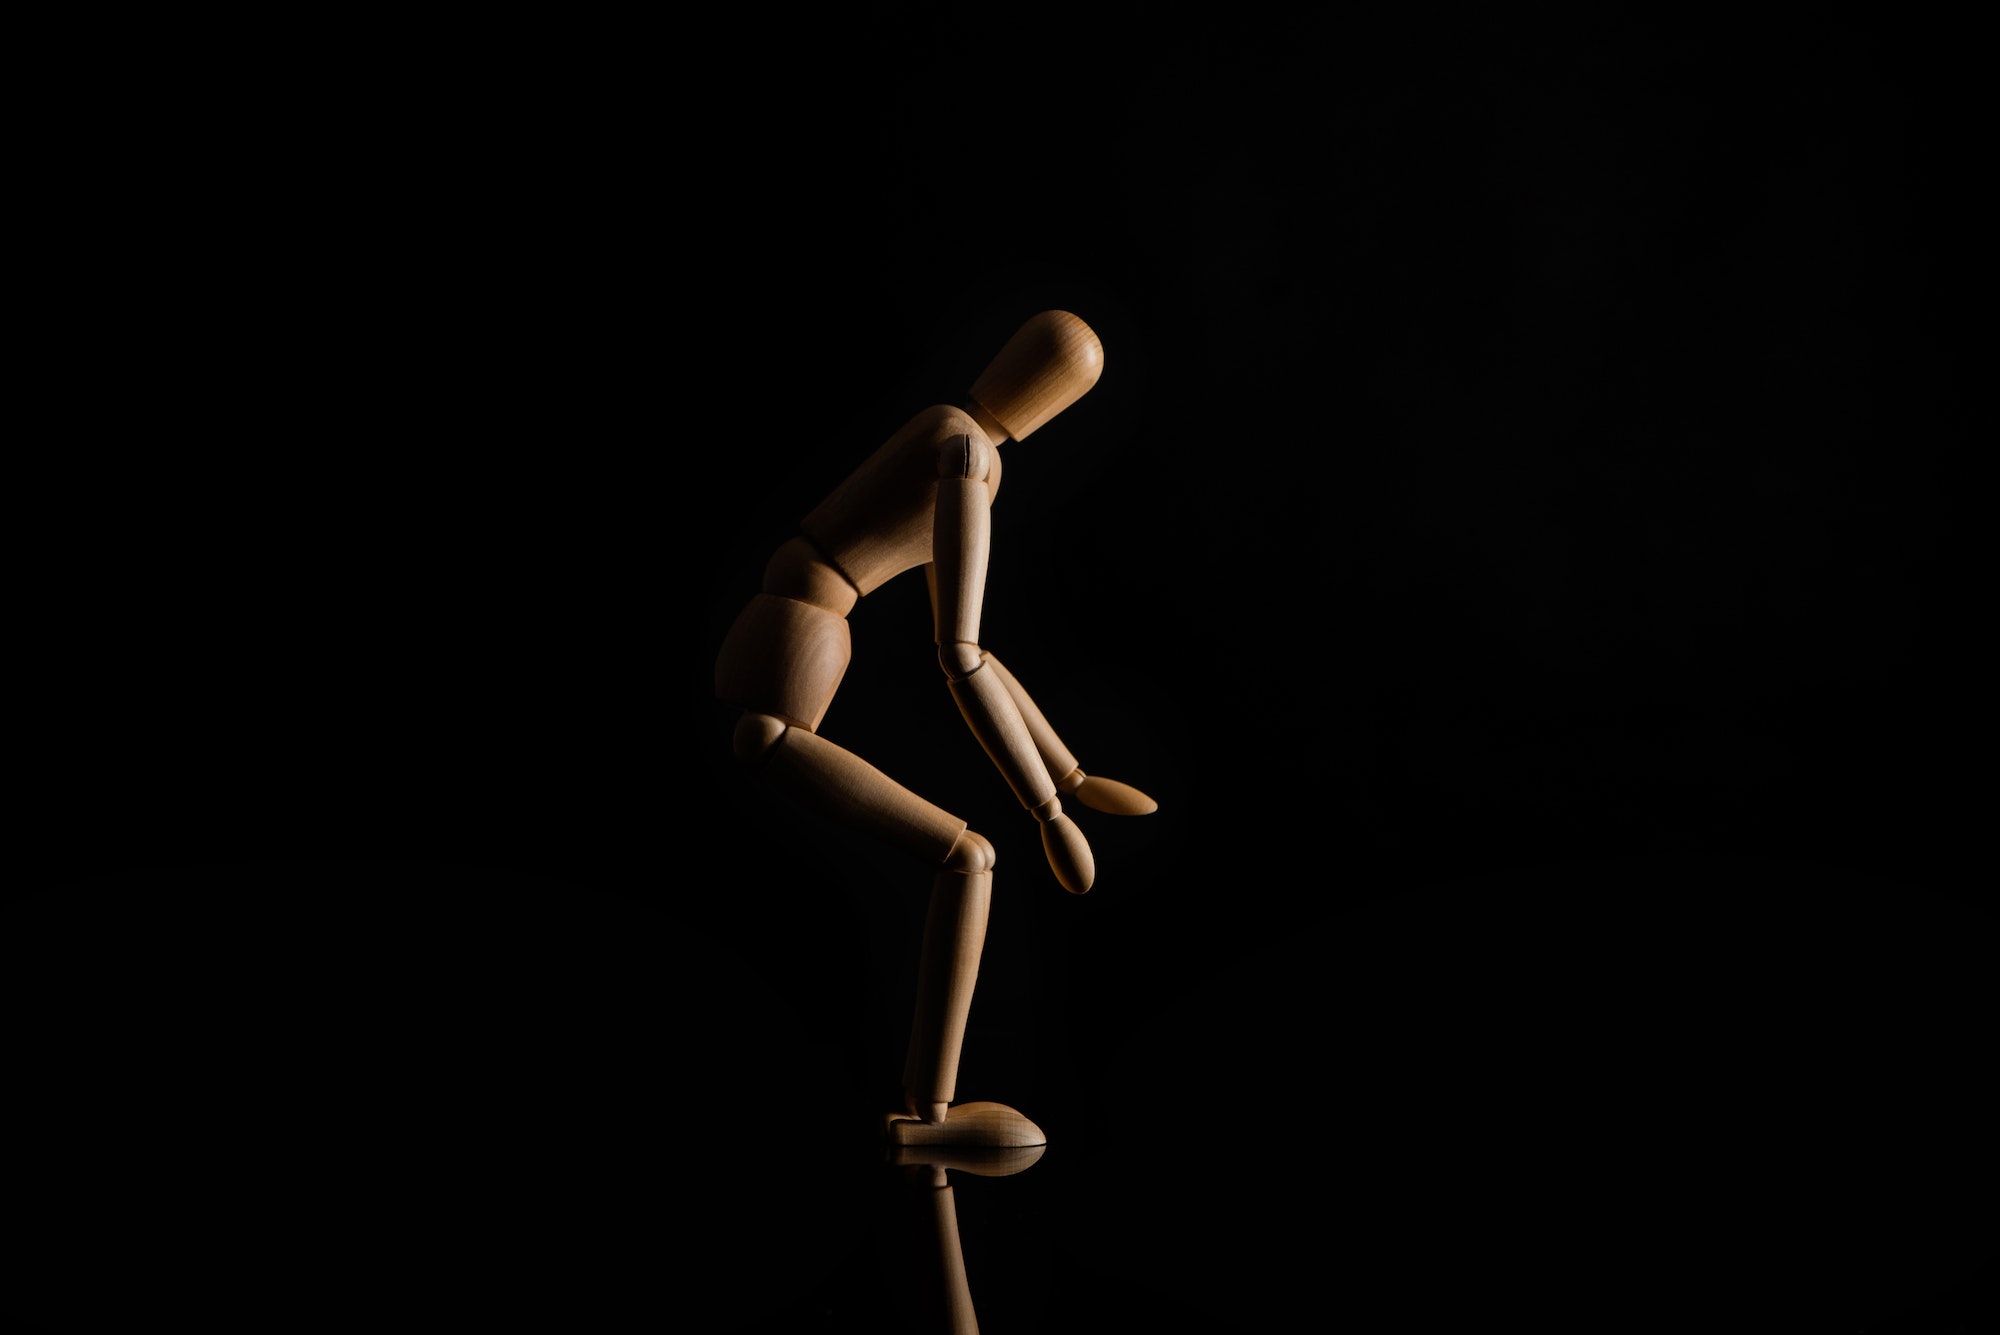 Wooden Doll in Sitting Position on Black Background